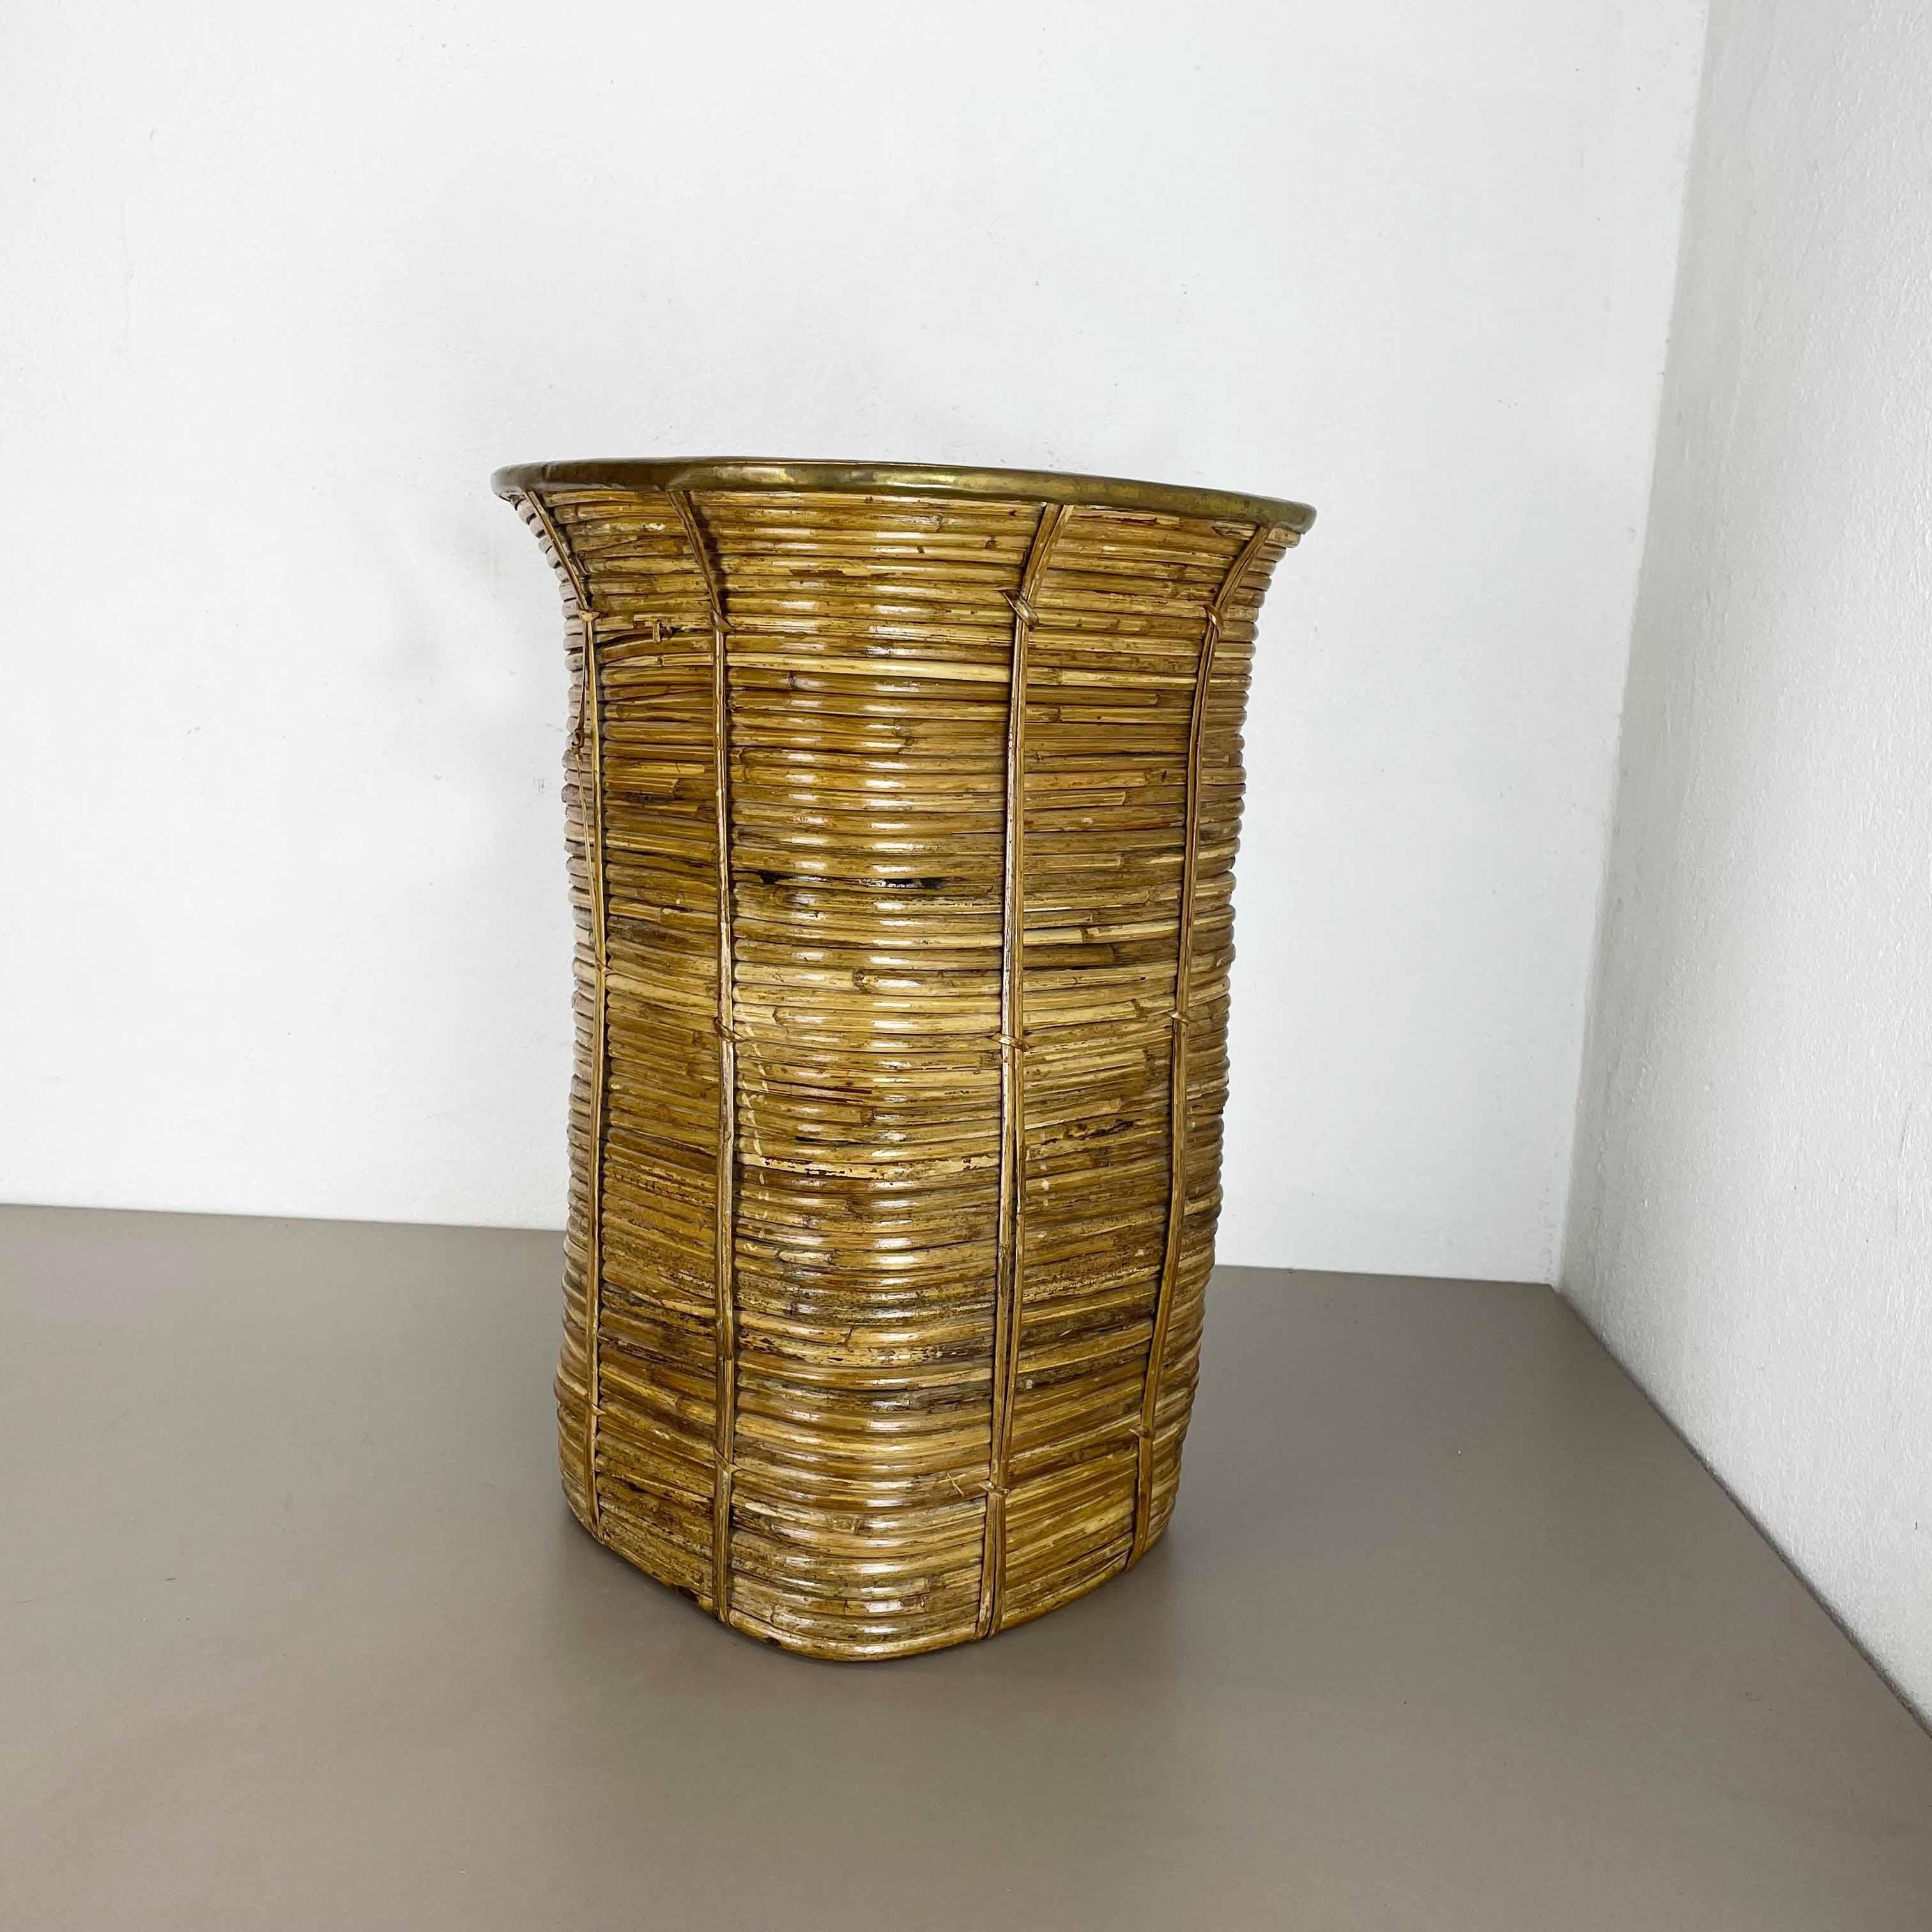 Article: waste bin paper bin umbrella stand

Origin: France

Age: 1960s

This original vintage Bauhaus style waste bin paper bin umbrella stand was produced in the 1960s in France. It is made of natural rattan with a brass applications at the